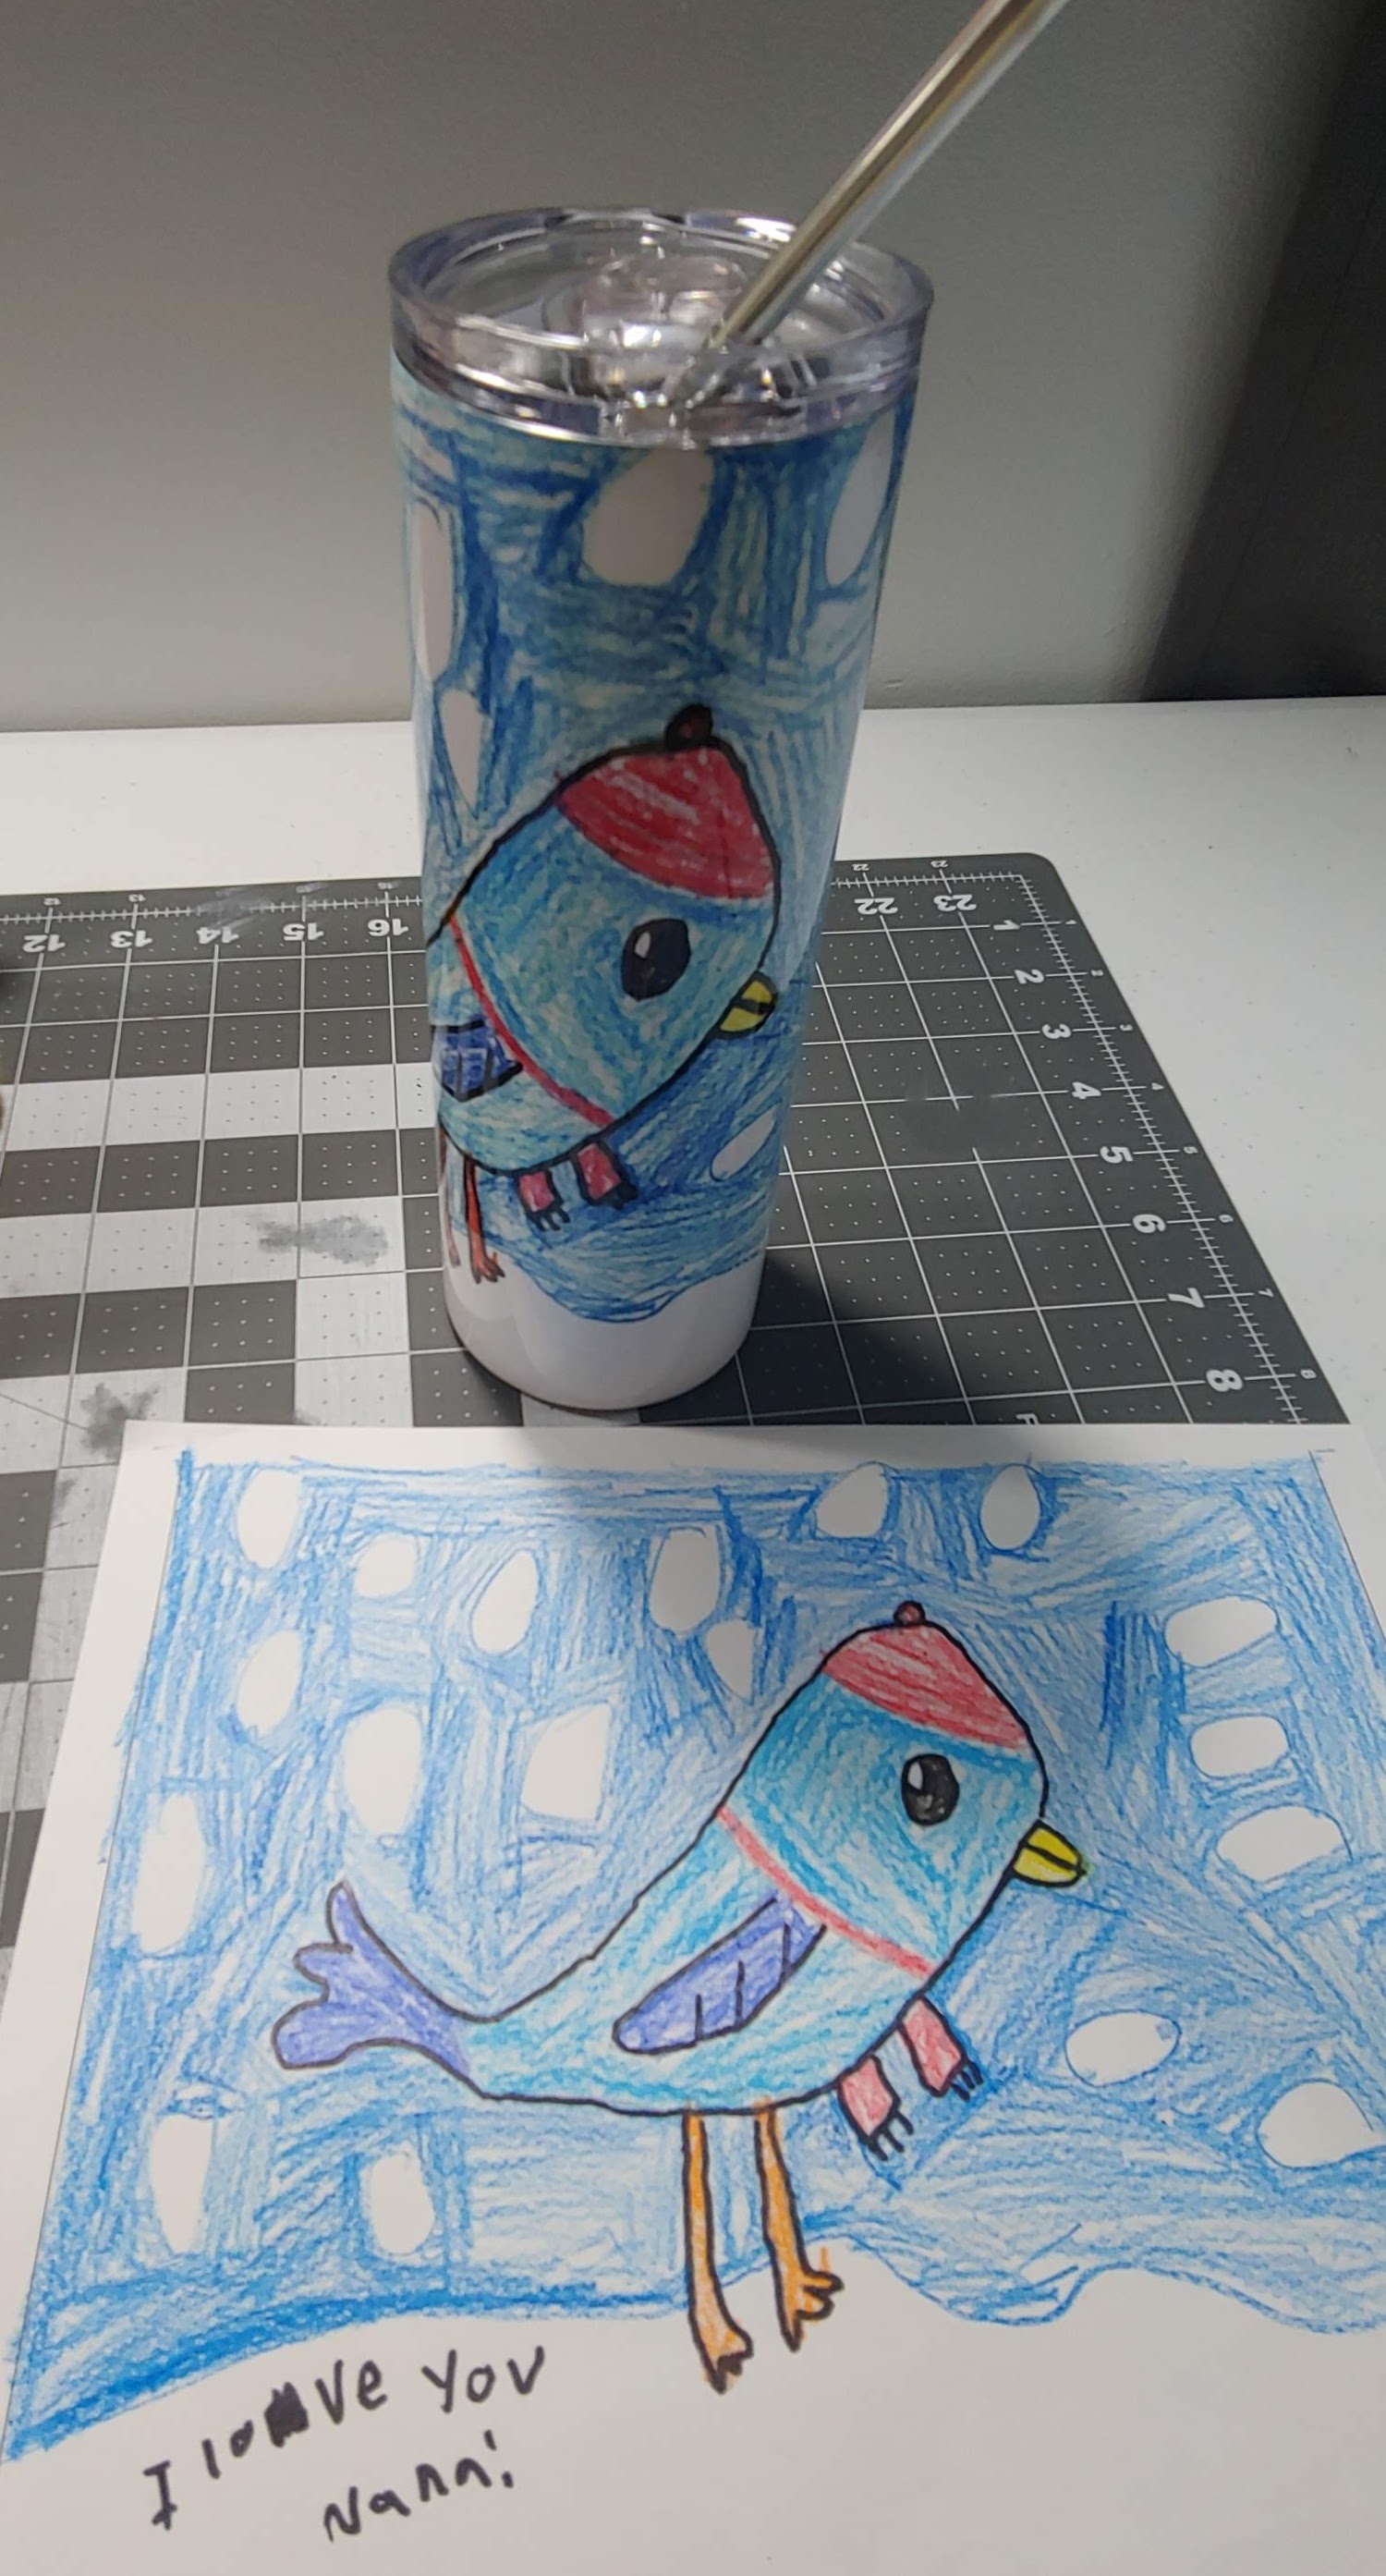 Sublimated Artwork on Tumbler made with sublimation printing